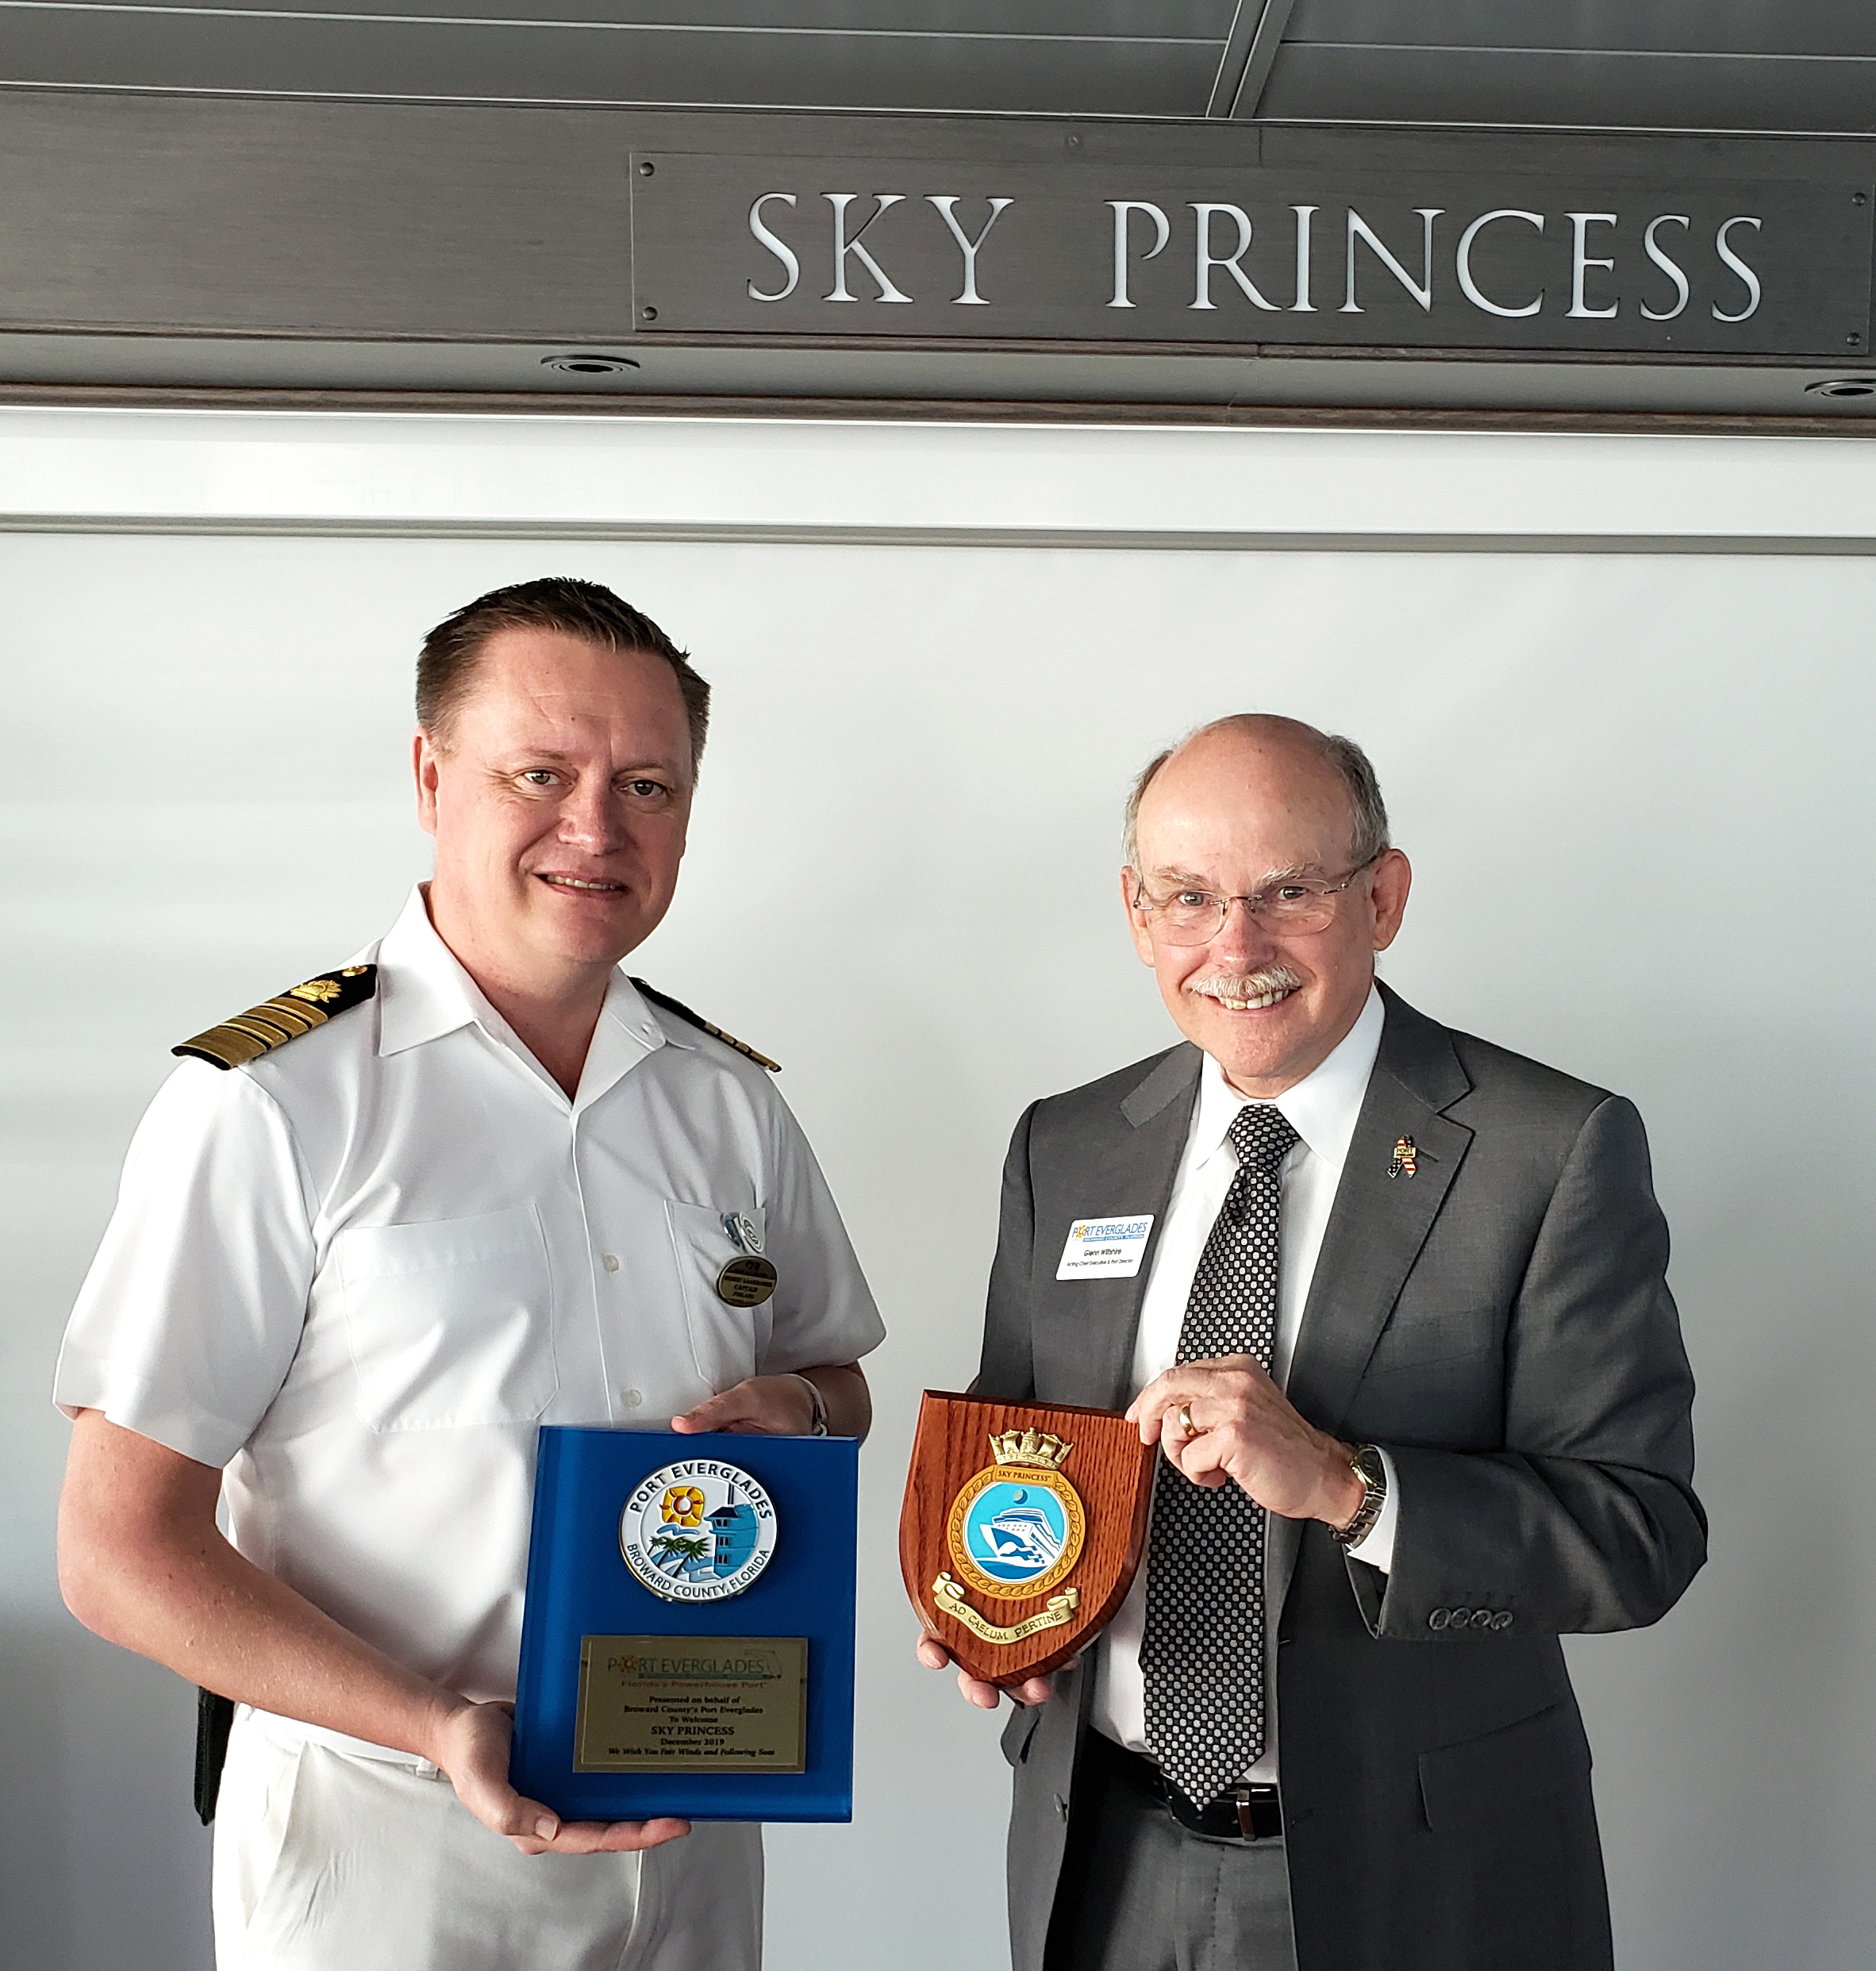 Acting Chief Executive & Port Director Glenn Wiltshire (right) and Sky Princess Captain Heikki Laakkonen exchange plaques aboard the Sky Princess. 